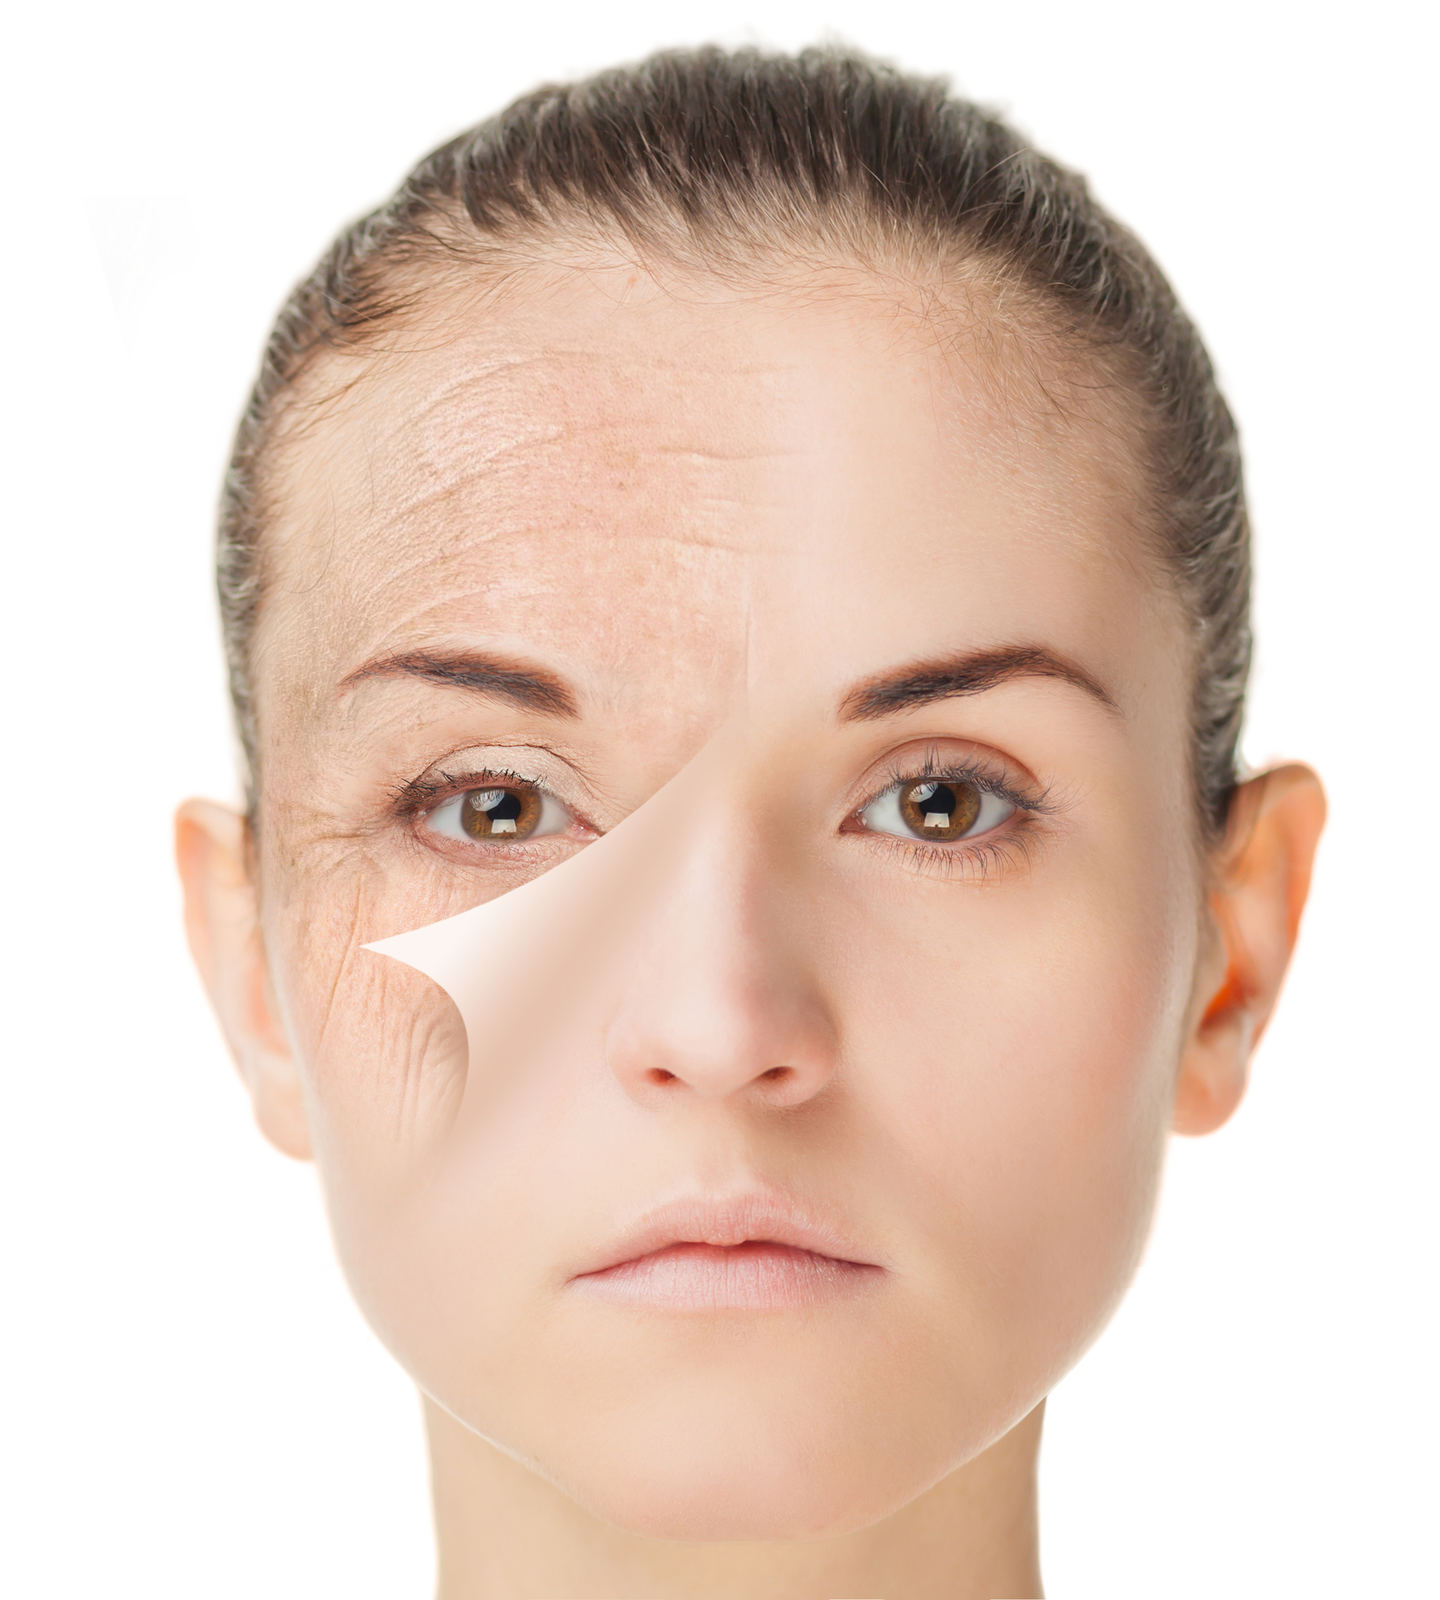 Skin care treatment before and after, rejuvenation procedure